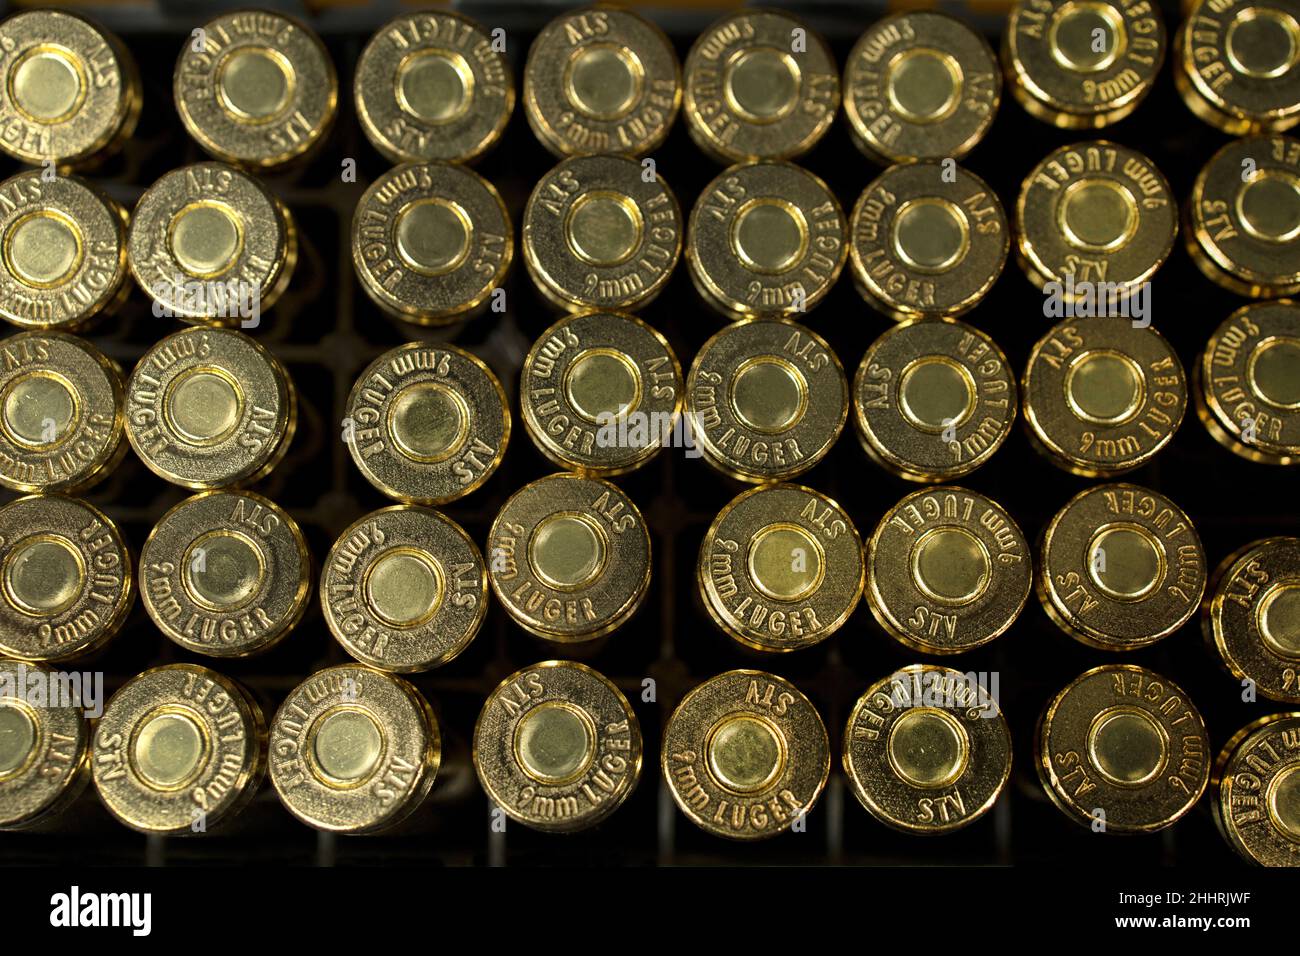 9 mm, 9mm, 9x19mm luger, ammo, ammunition, arms, arms trade, background, brass, bullet, bullets, bunch, centerfire, closeup, crime, criminal, defence, Stock Photo